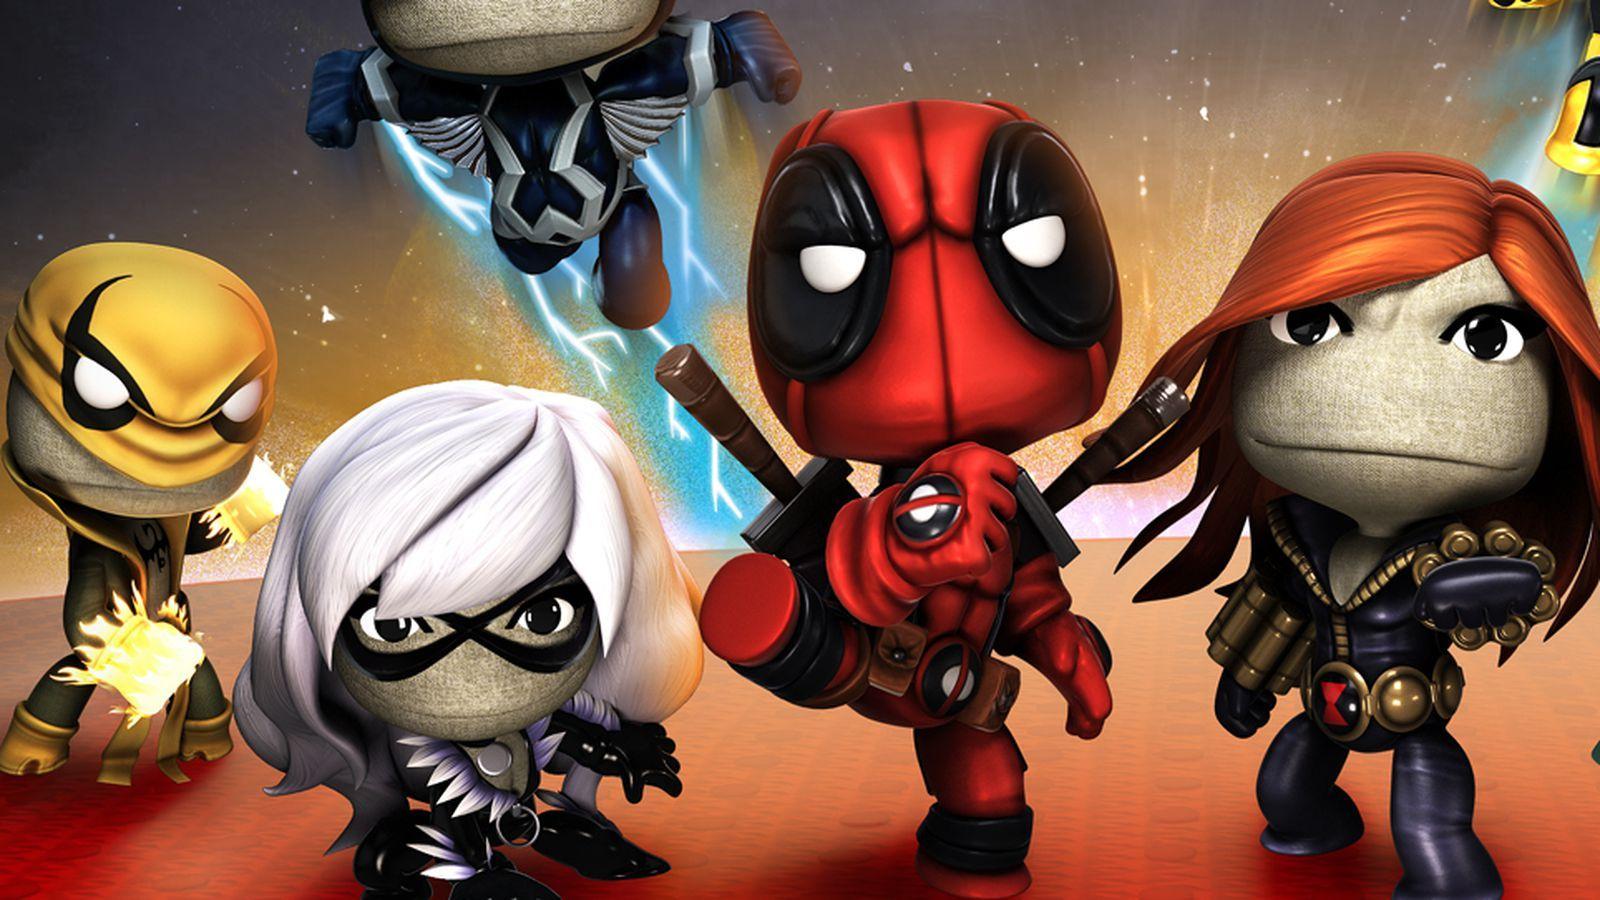 LittleBigPlanet's Marvel DLC to be pulled from PlayStation Store